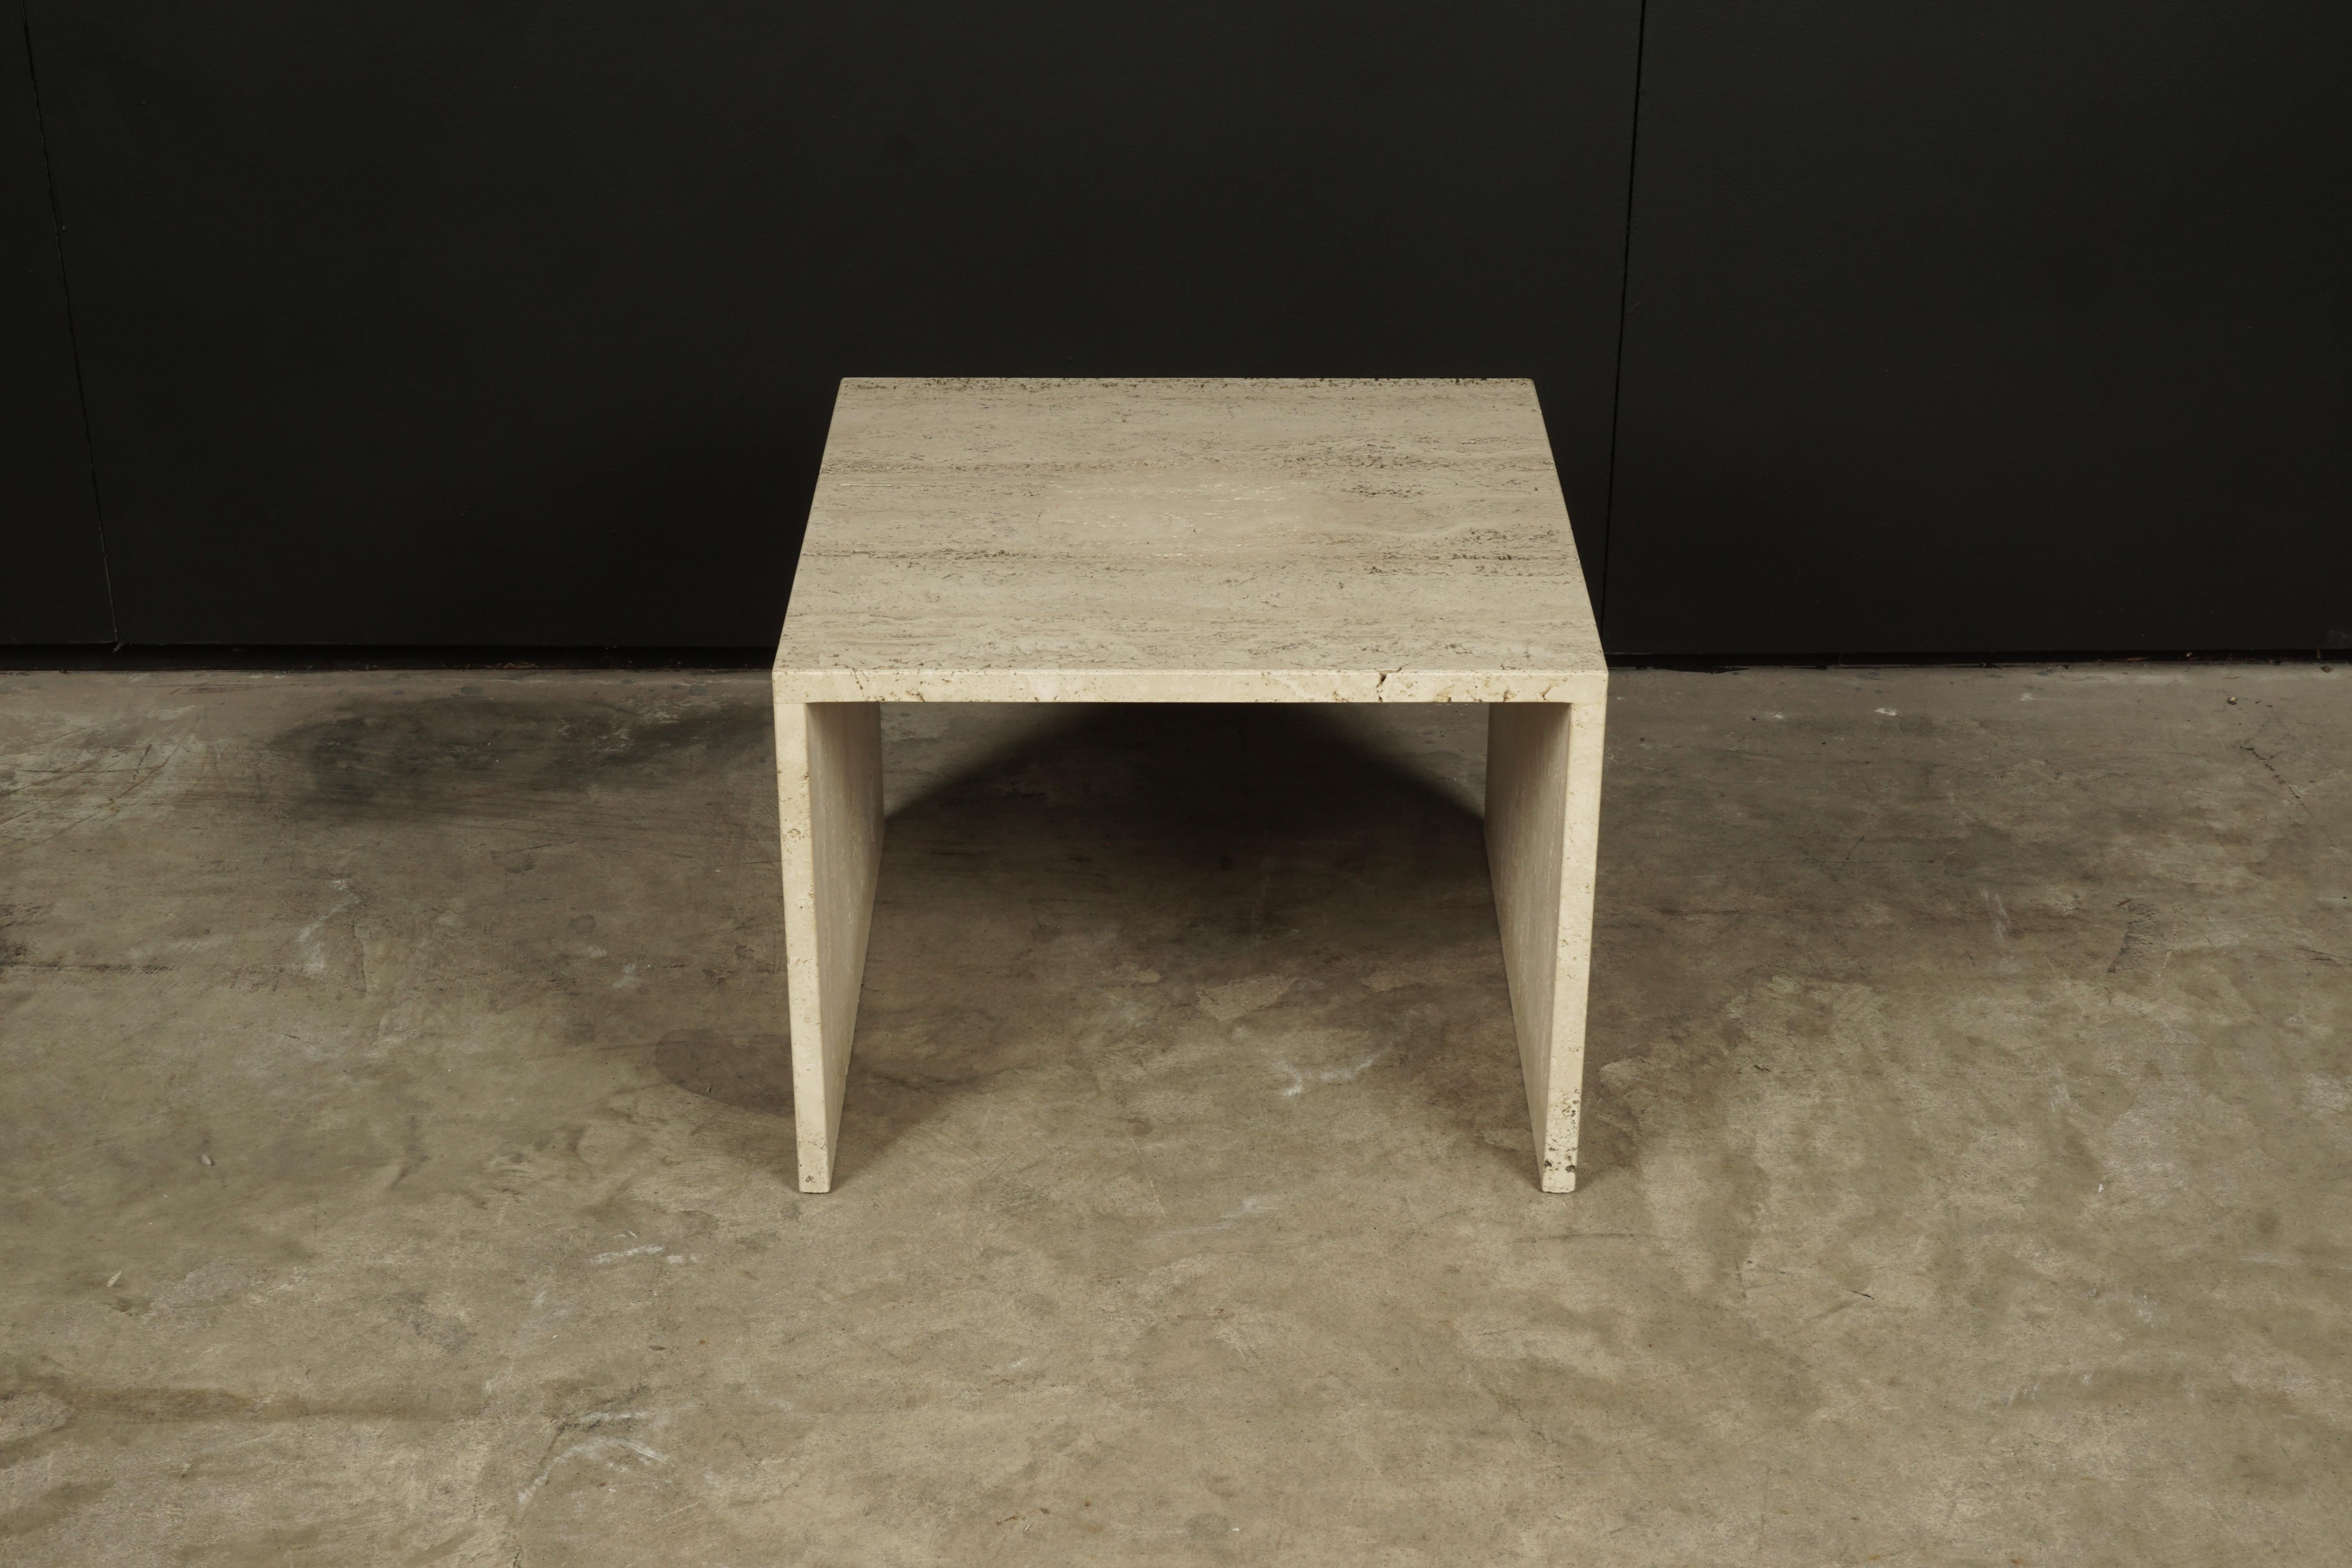 Vintage travertine side table from France, 1960s. Solid travertine with very light wear and use.